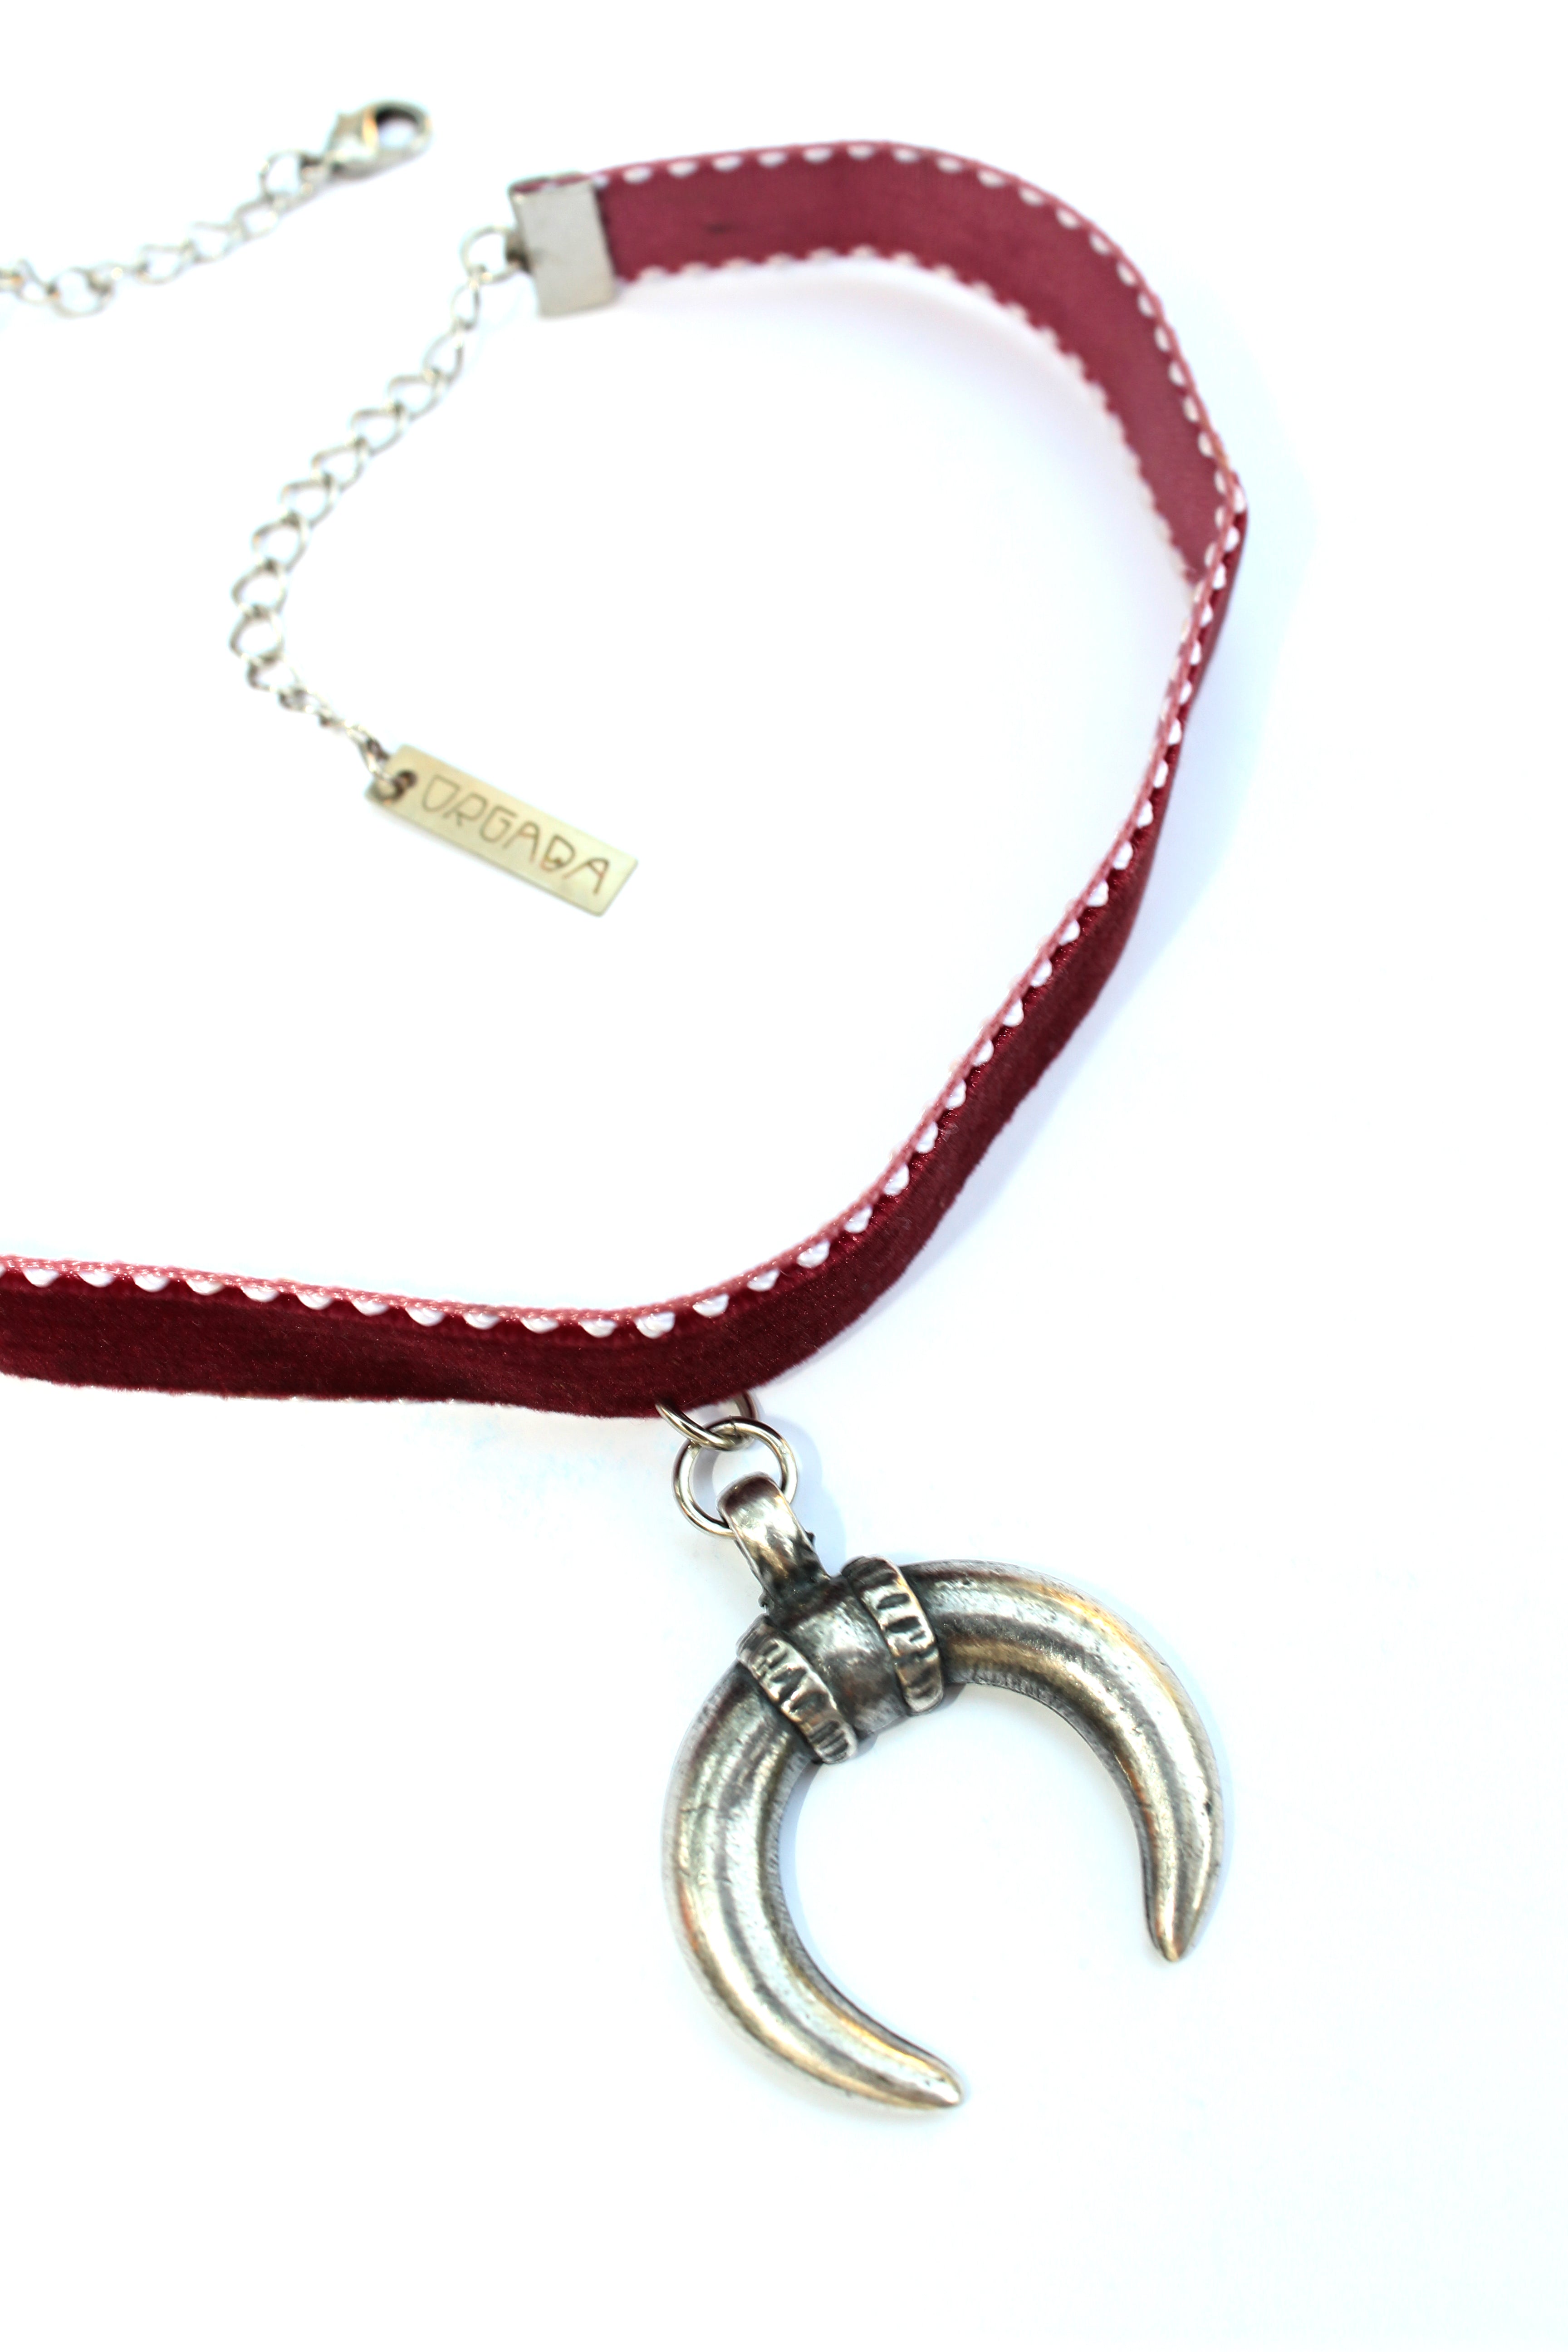 Orgada's Maroon Gypsy Luna Choker made with a soft velvet strap and a moon pendant on a white background